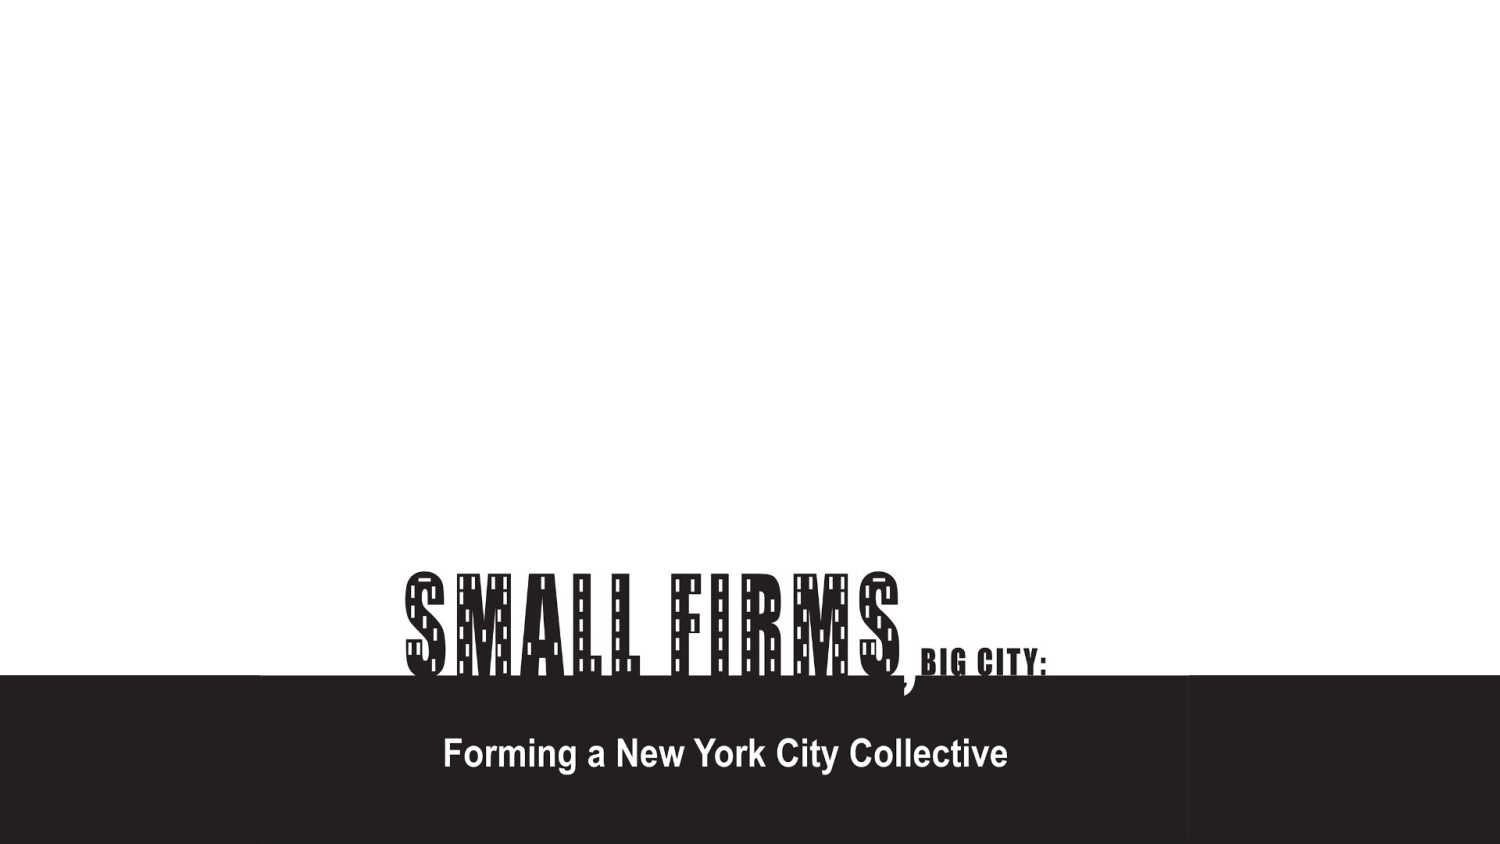 An invitation to Small Firms, Big City: Forming a New York City Collective Event, co-presented by Bureau V Architecture's Peter Zuspan.